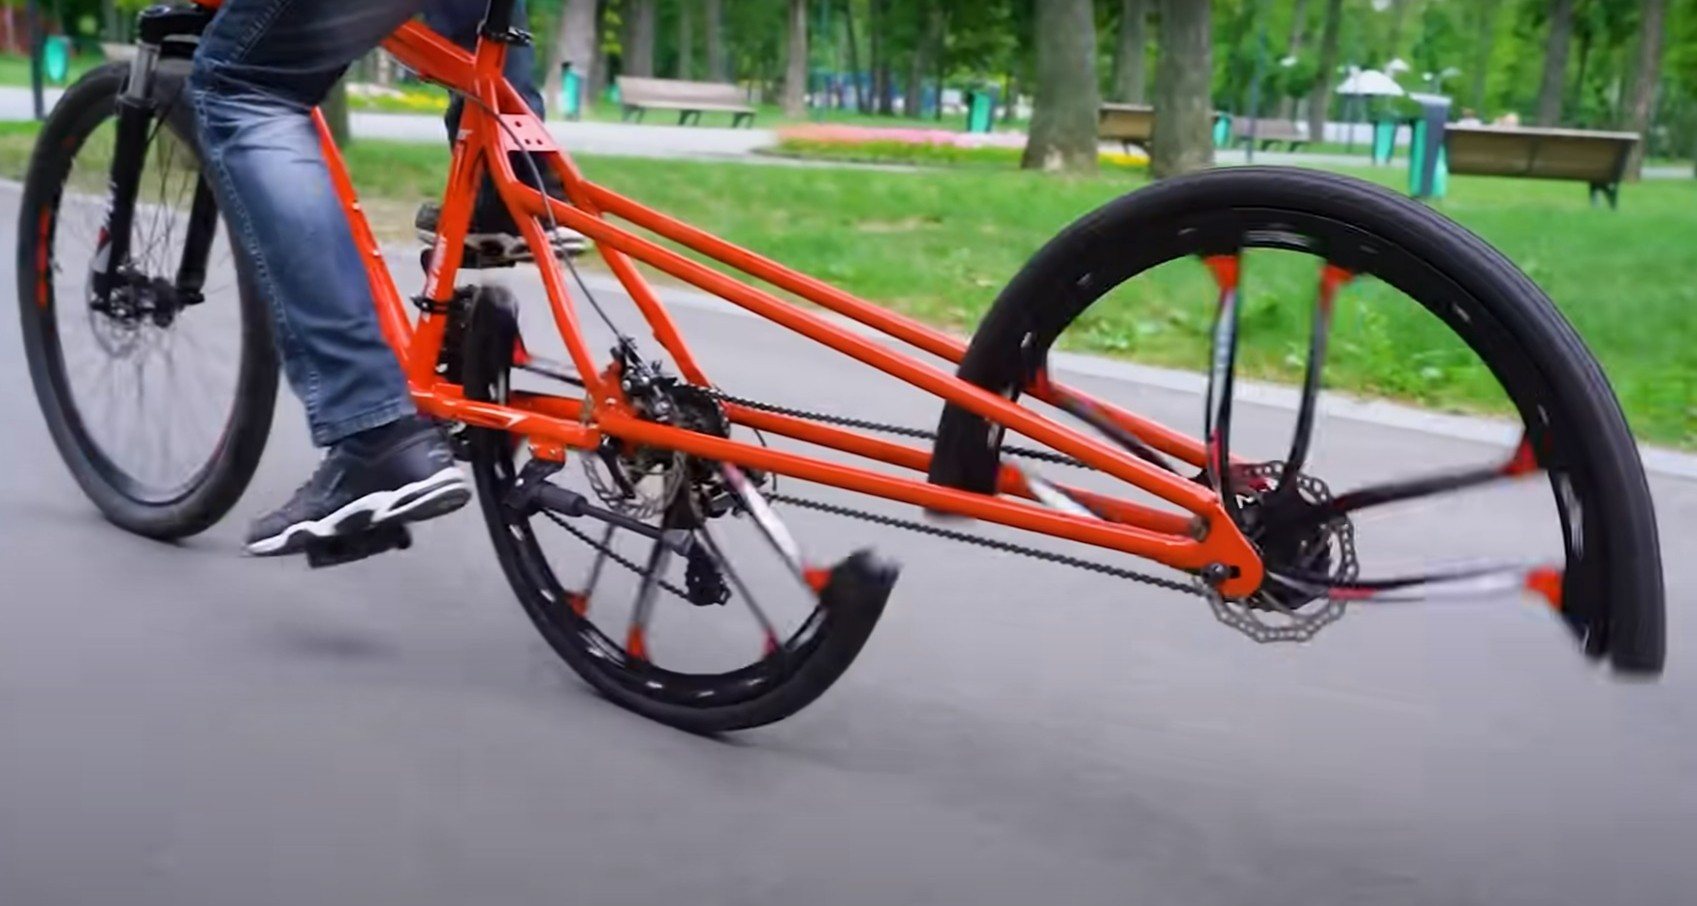 the wonders of mathematics are responsible for functional one off designs like this bike 3